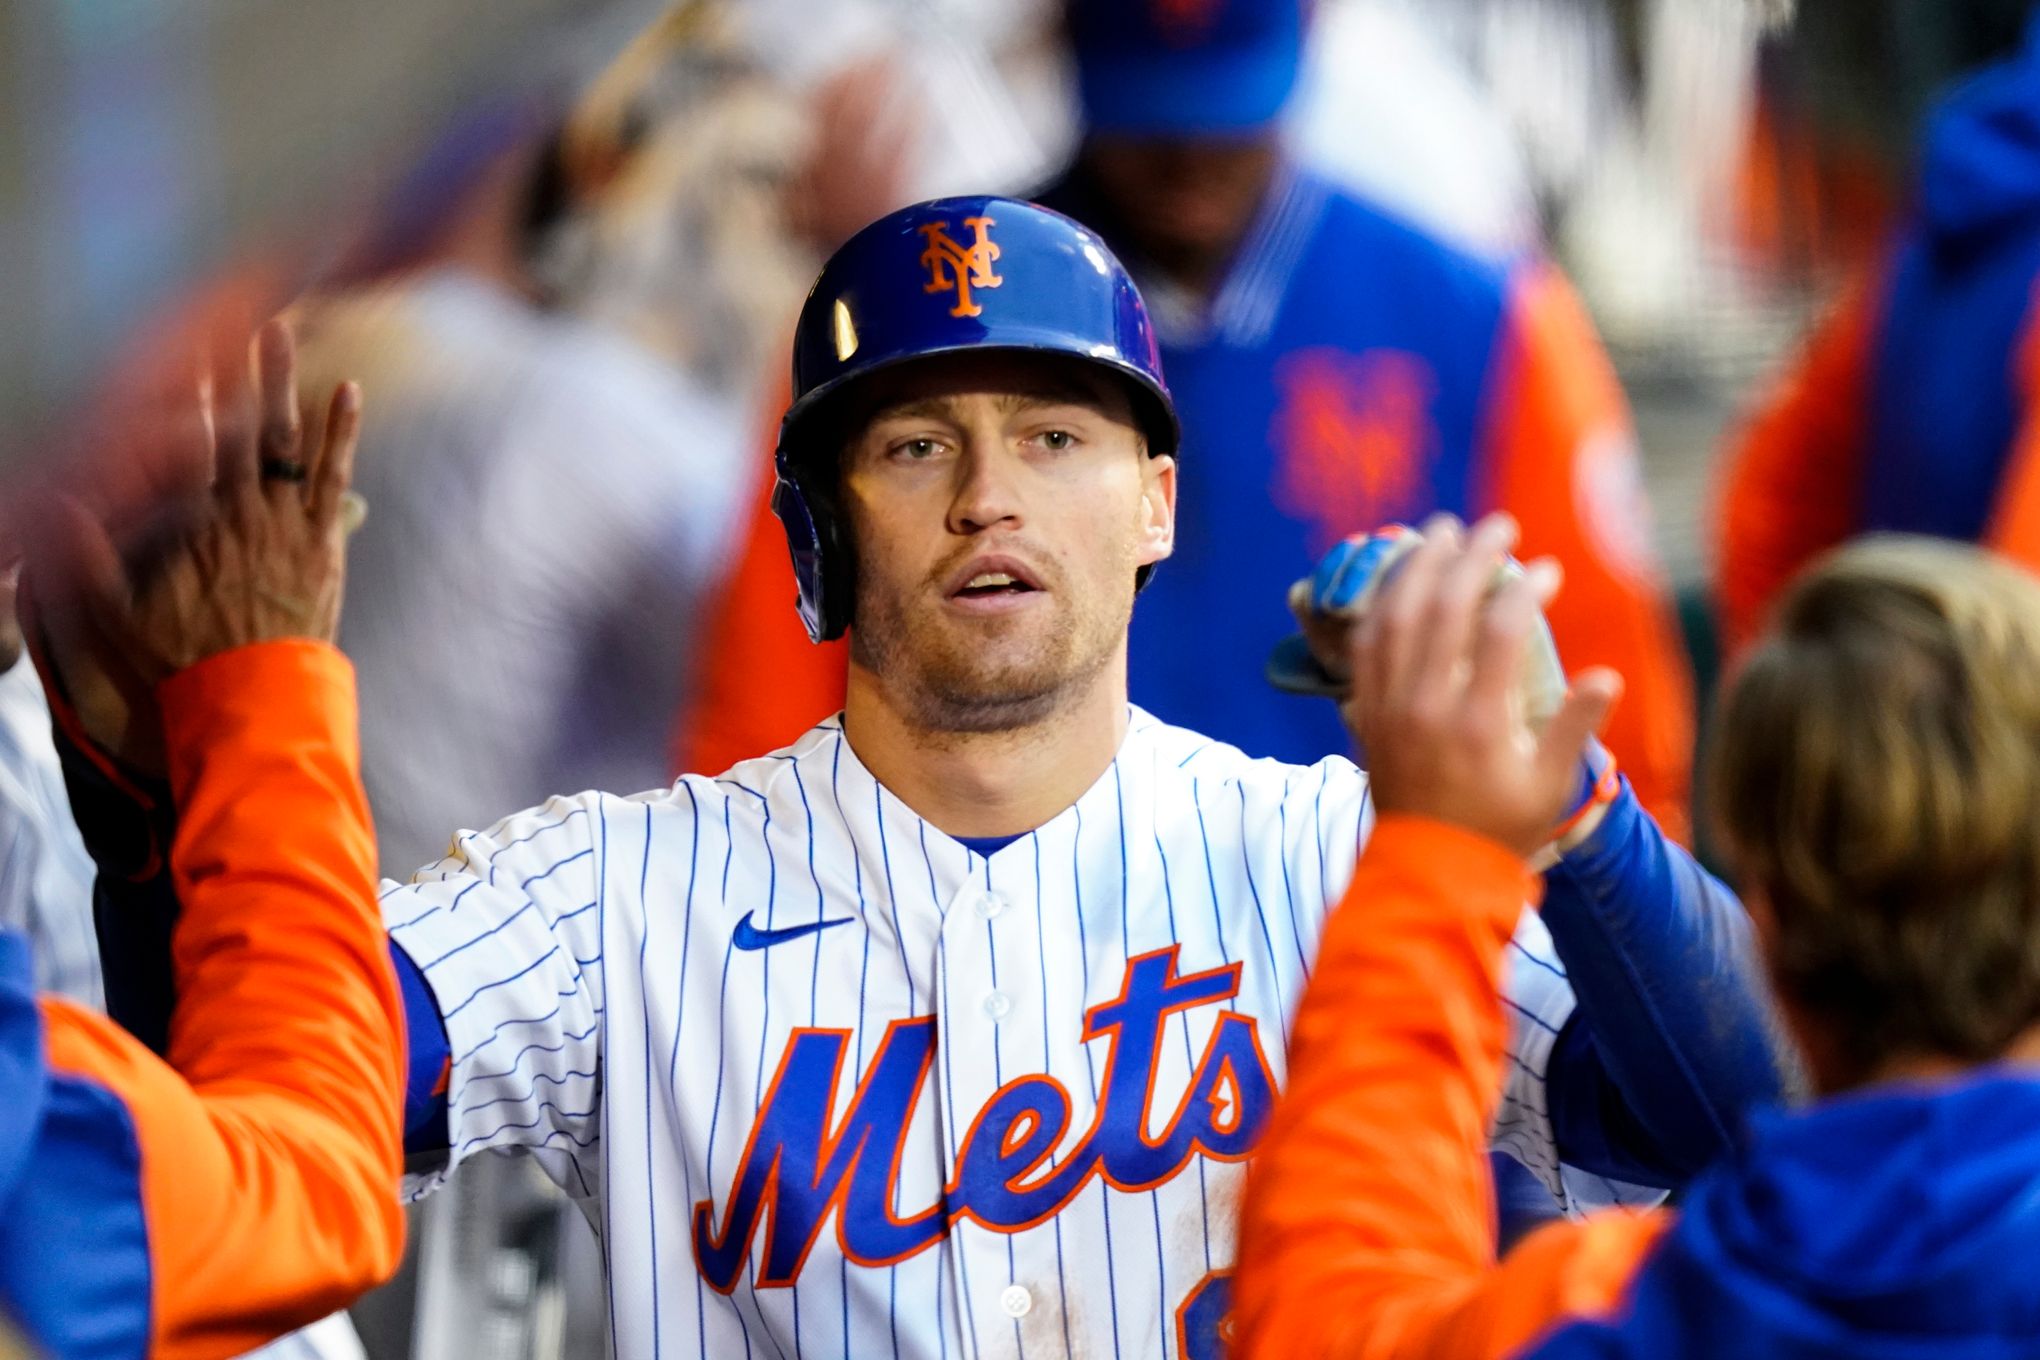 New York Mets: Three predictions for Brandon Nimmo in 2020